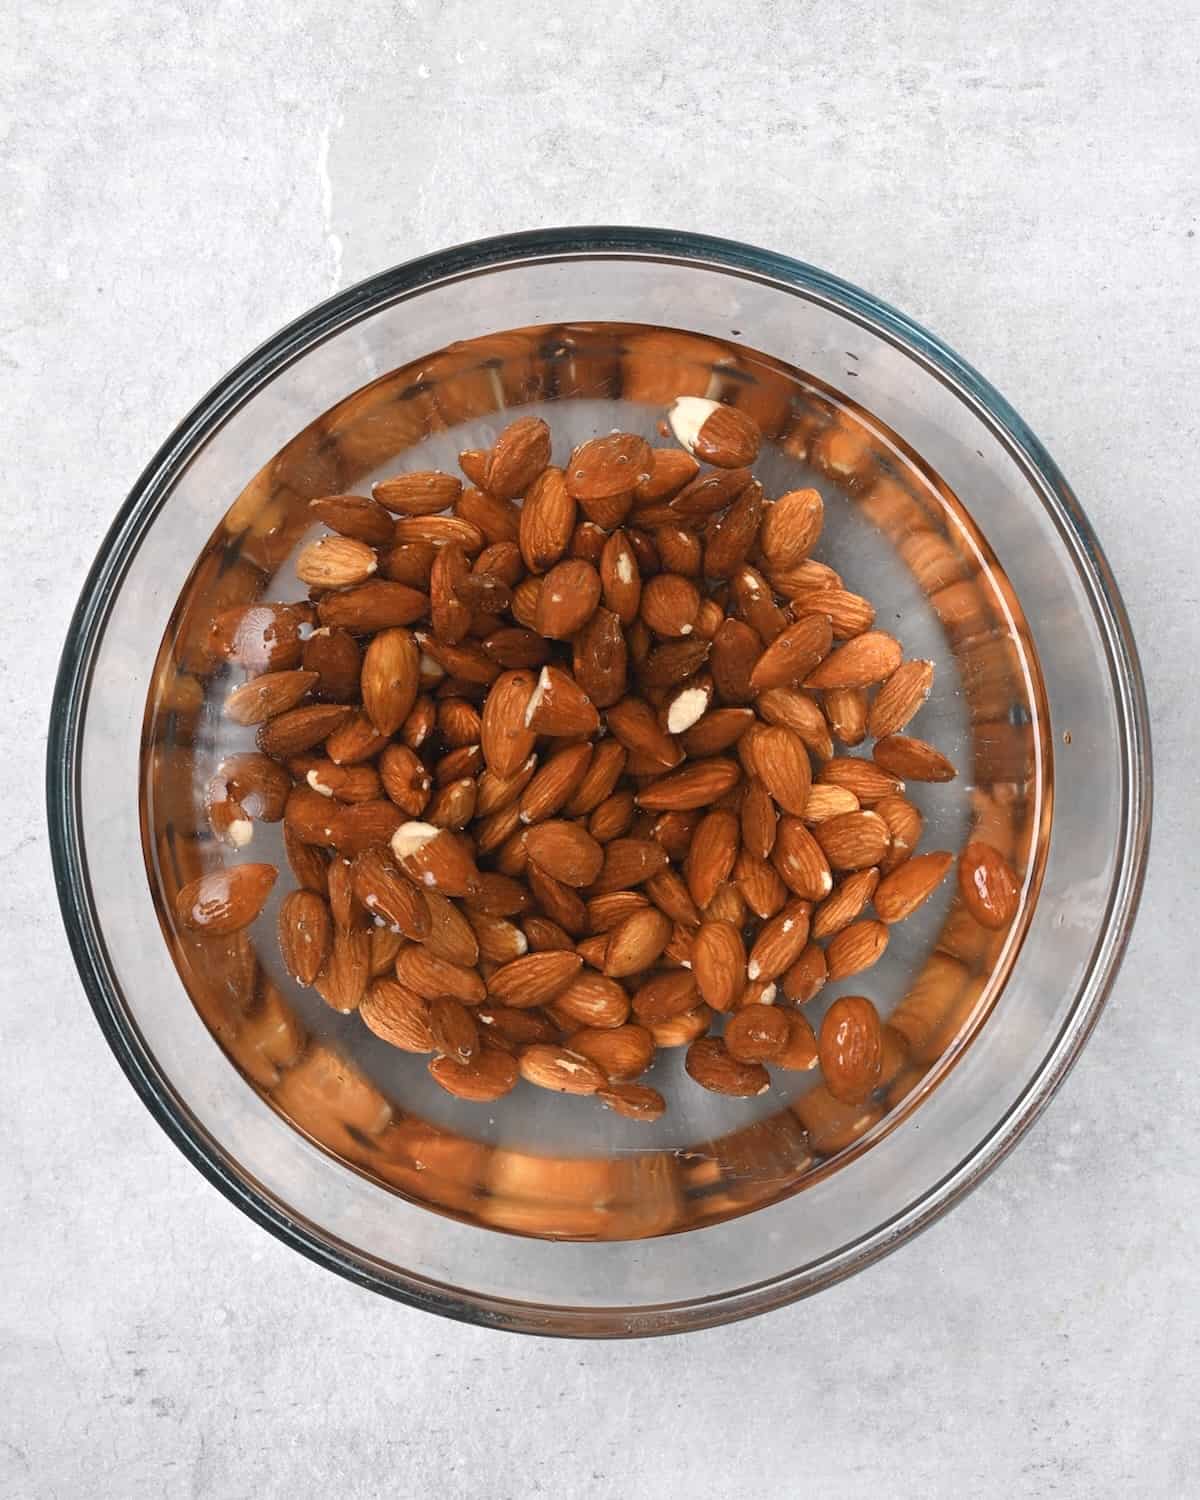 Soaking almond in a bowl with water